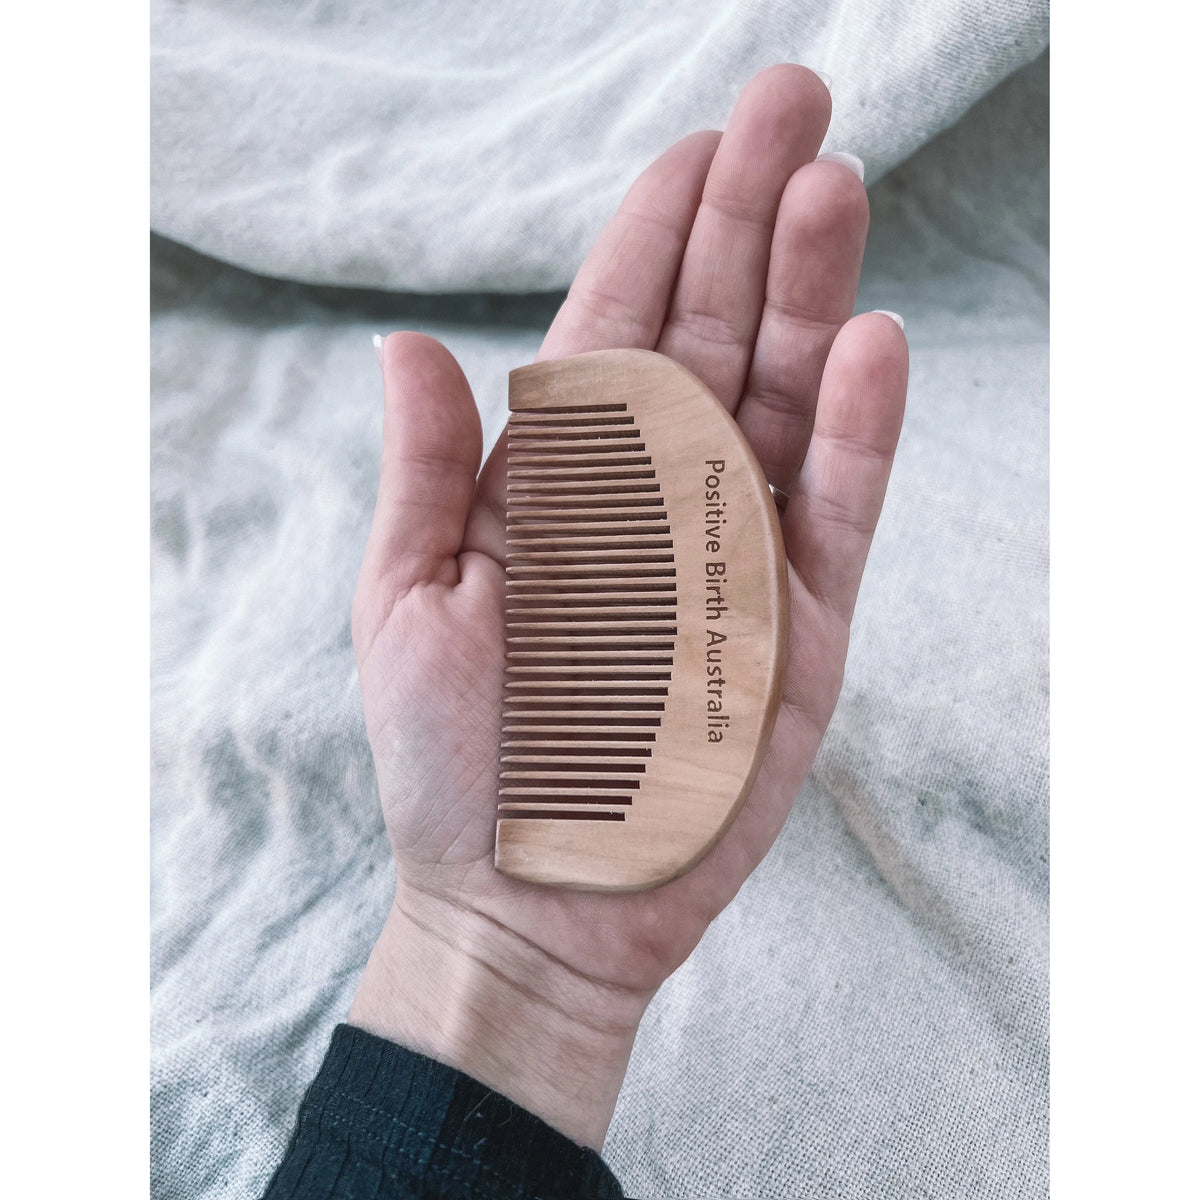 wooden birth comb in palm of hand